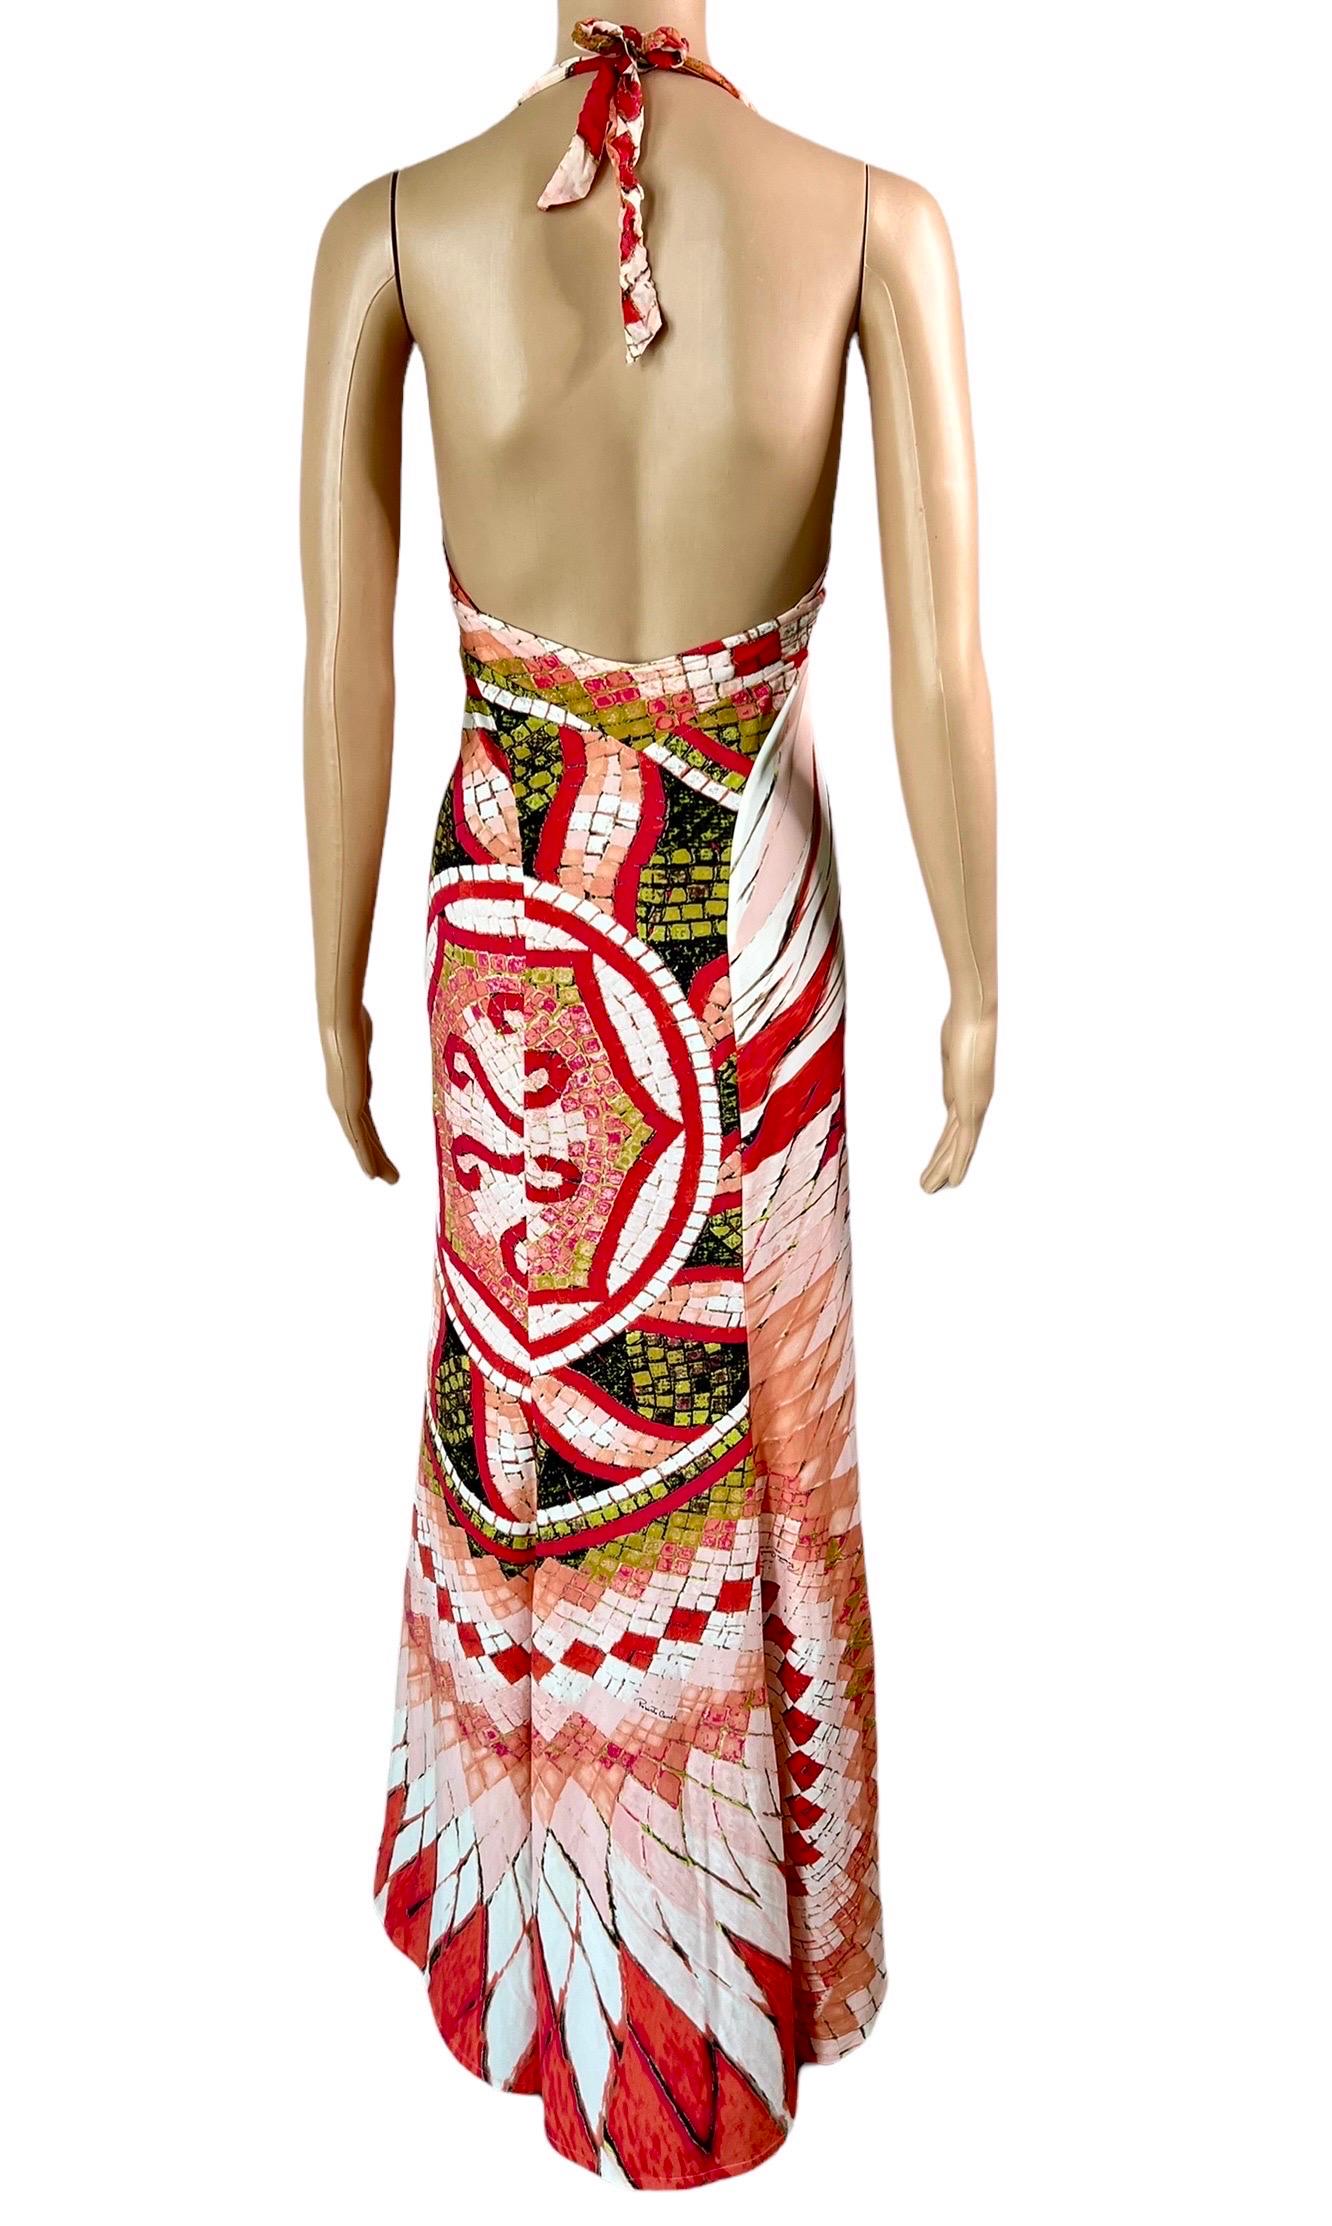 Beige Roberto Cavalli S/S 2004 Plunging Neckline Backless Maxi Evening Dress Gown For Sale